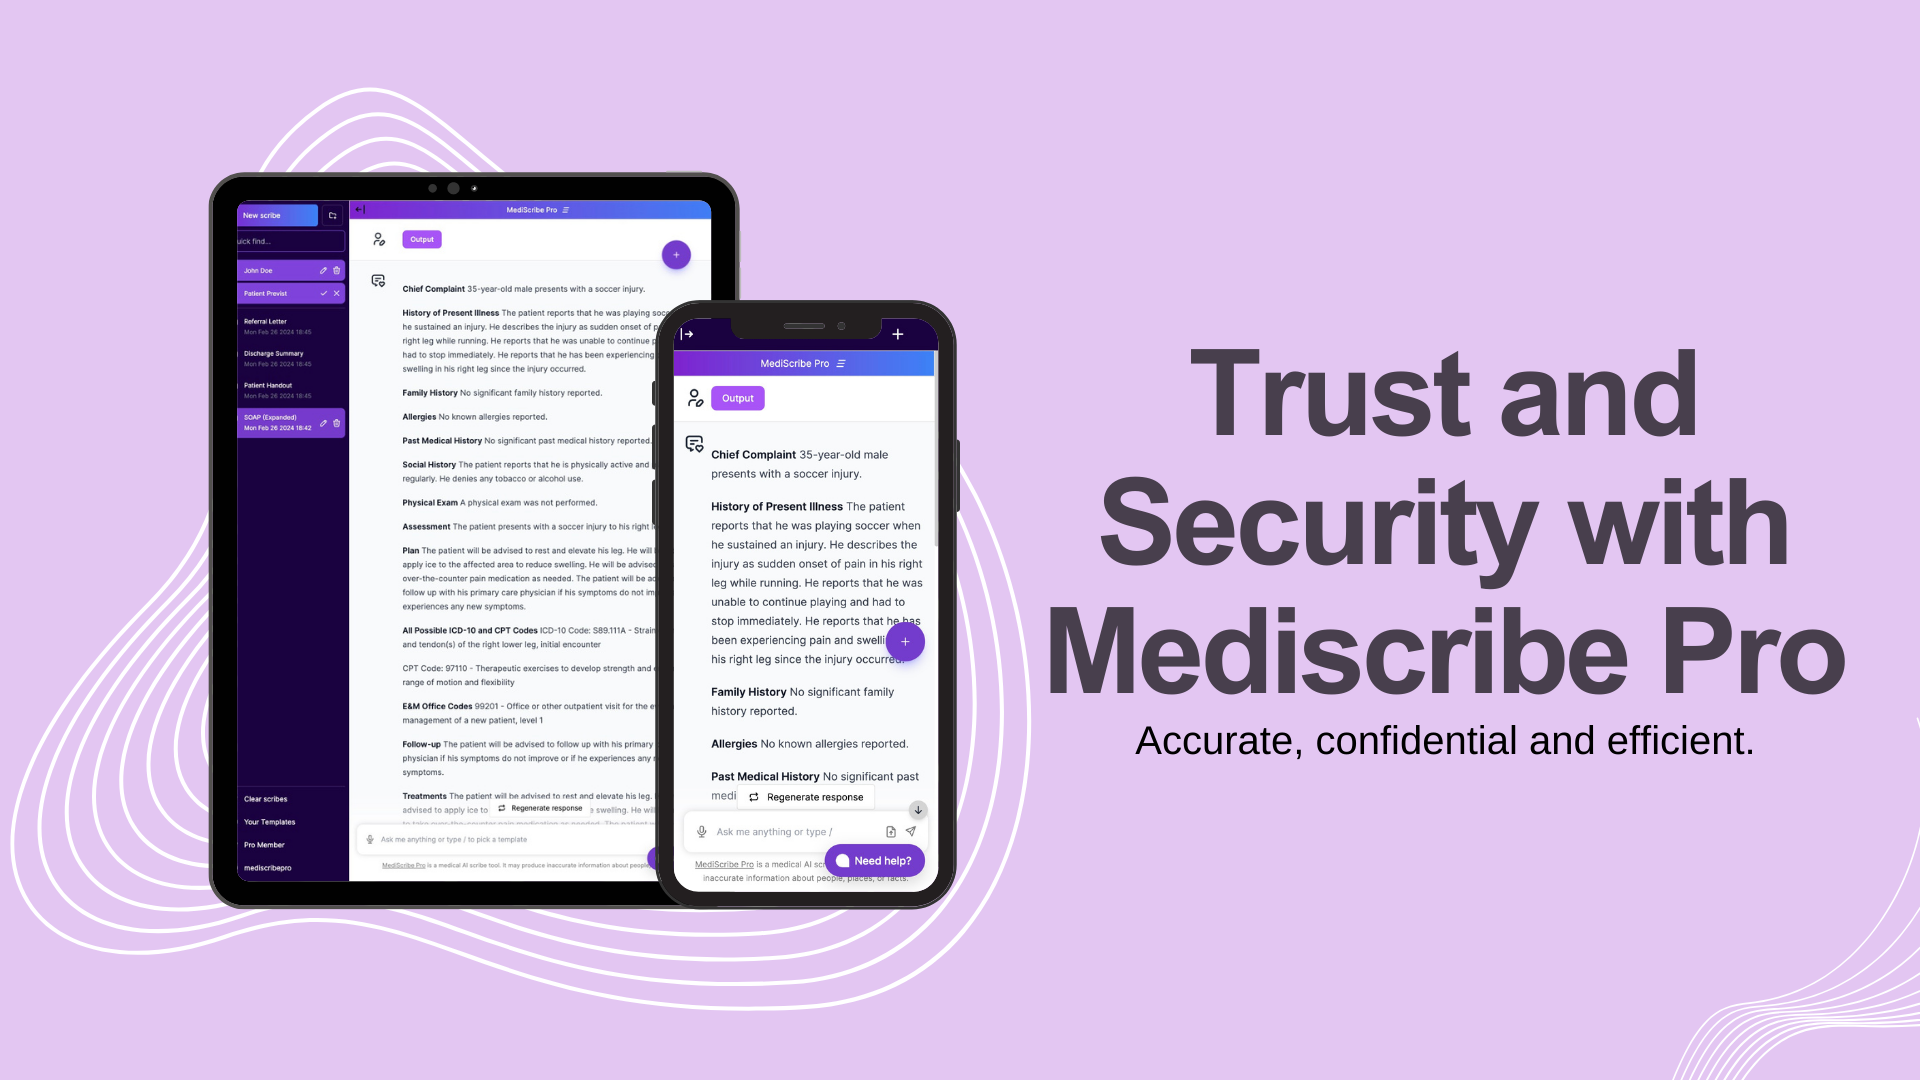 Trust and Security with Mediscribe Pro